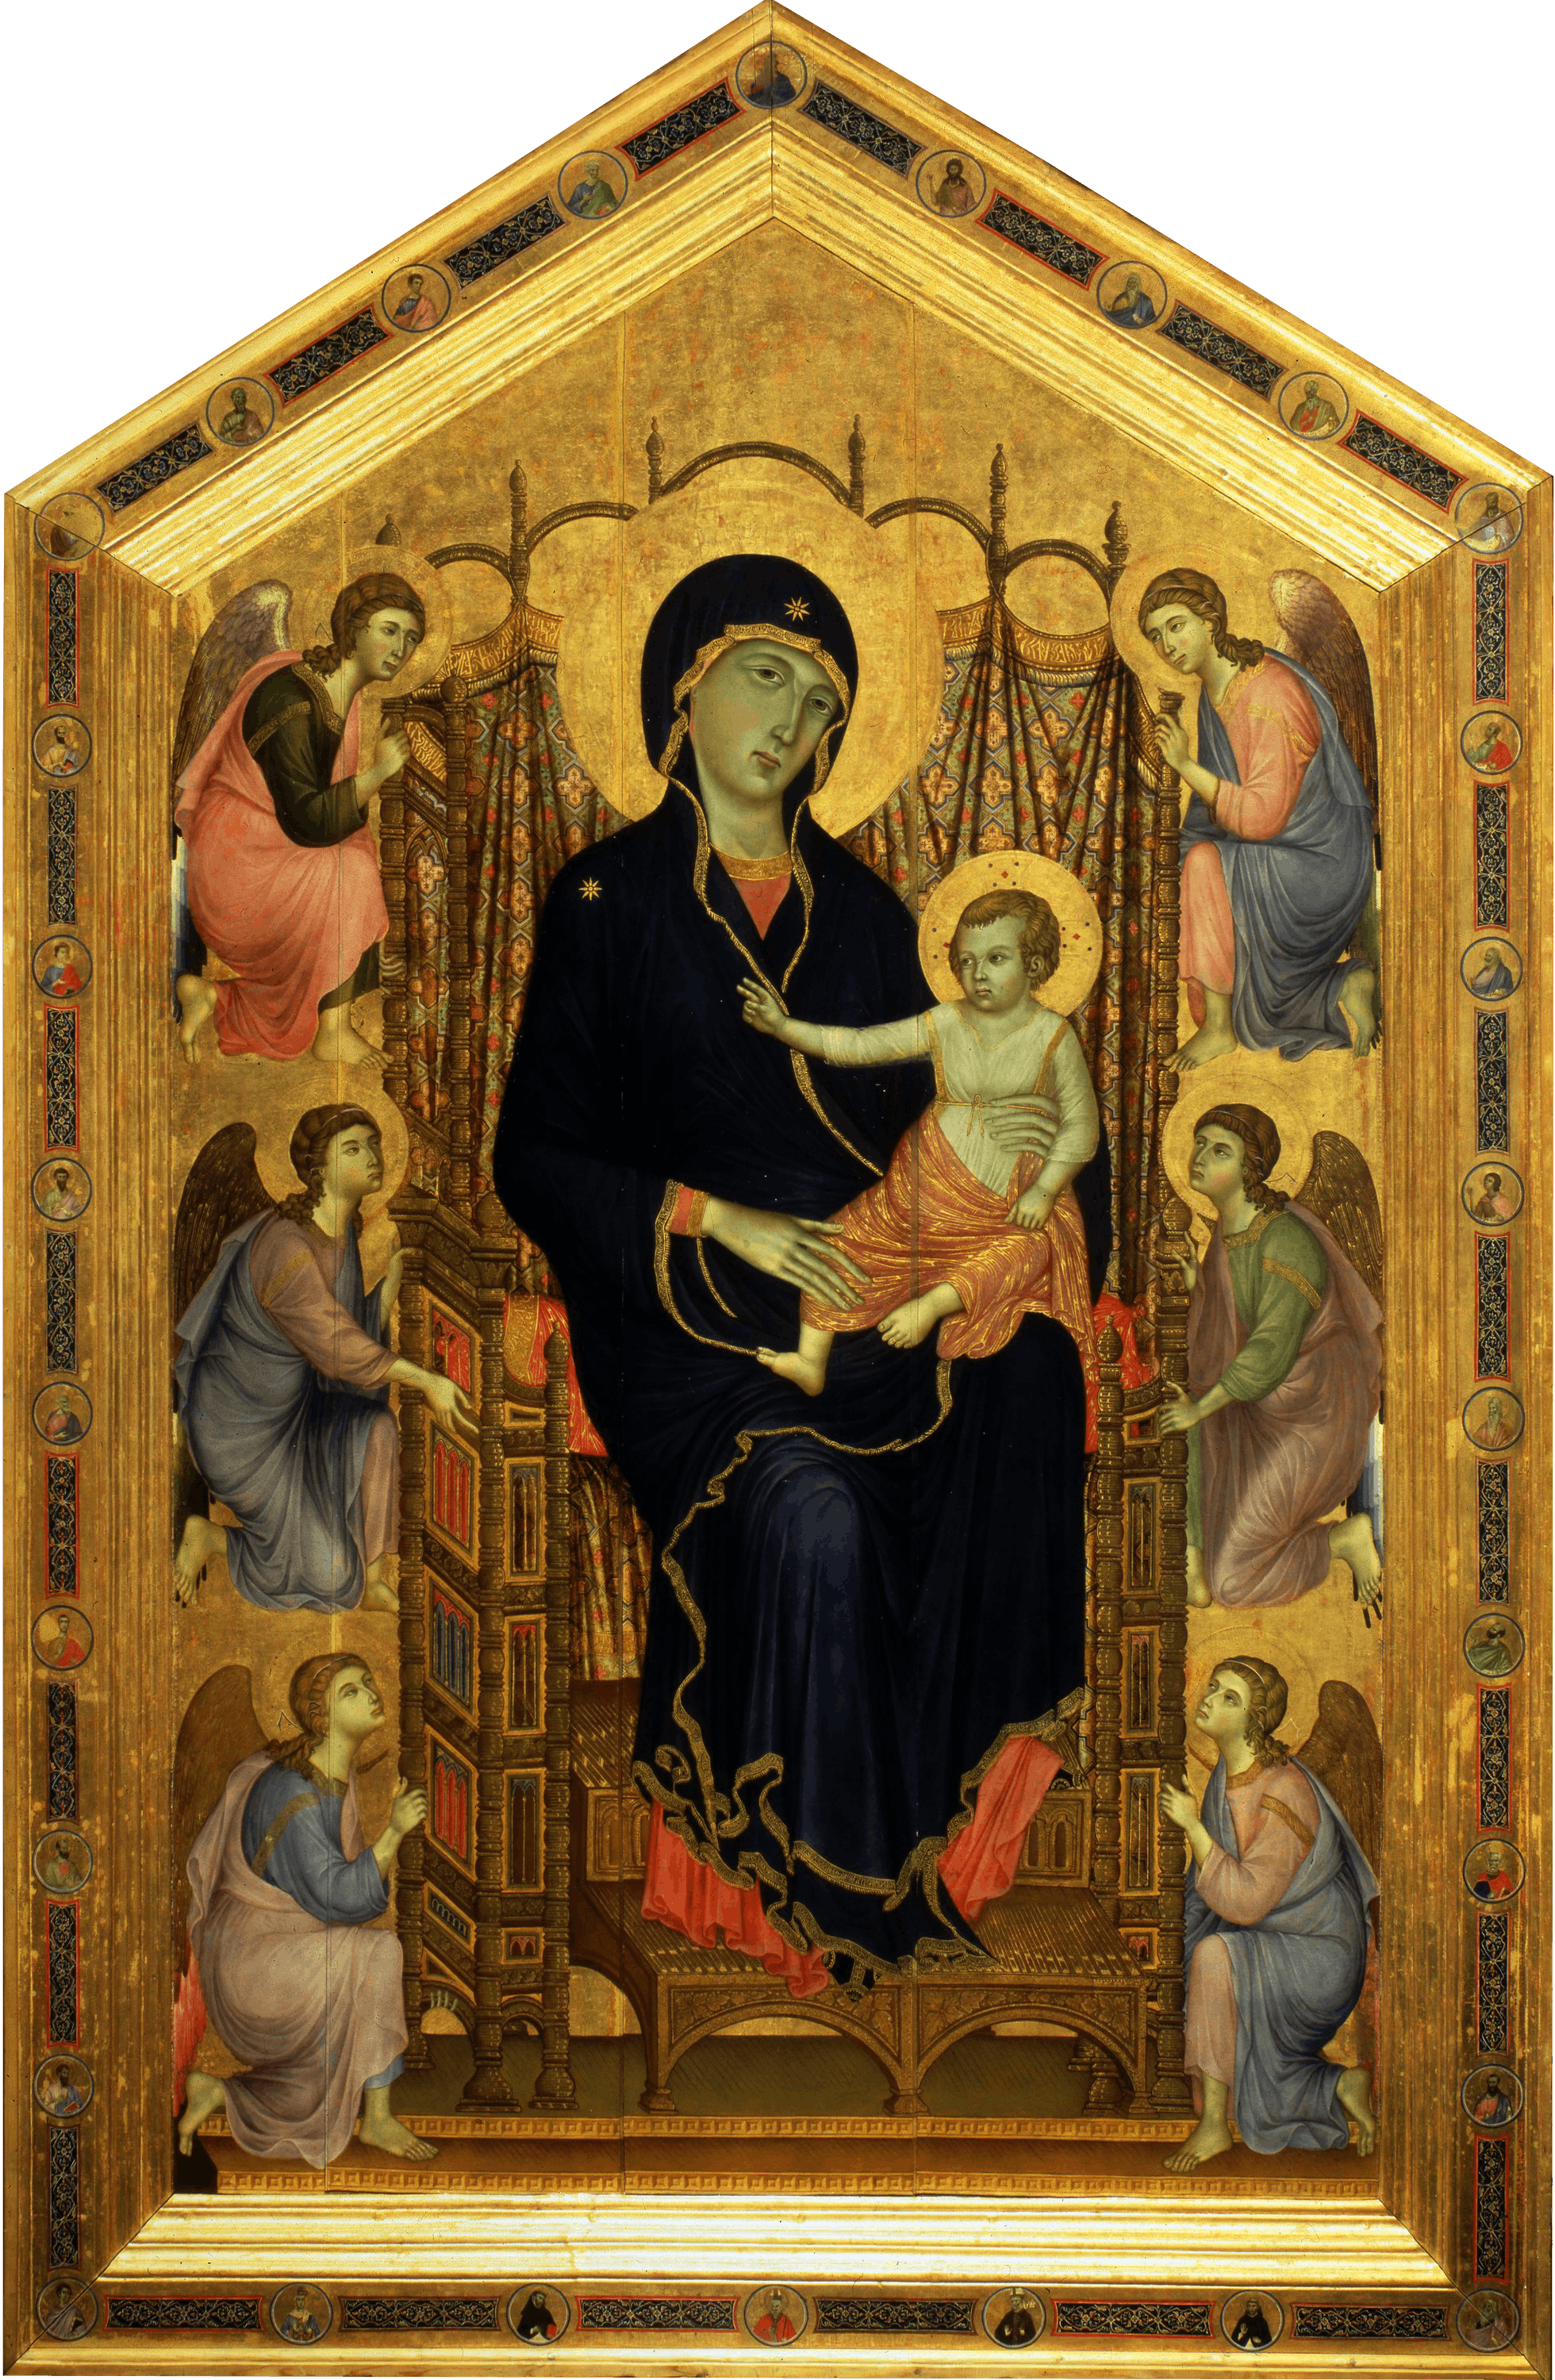 Virgin and Child enthroned, surrounded by angels (known as the Rucellai Madonna)